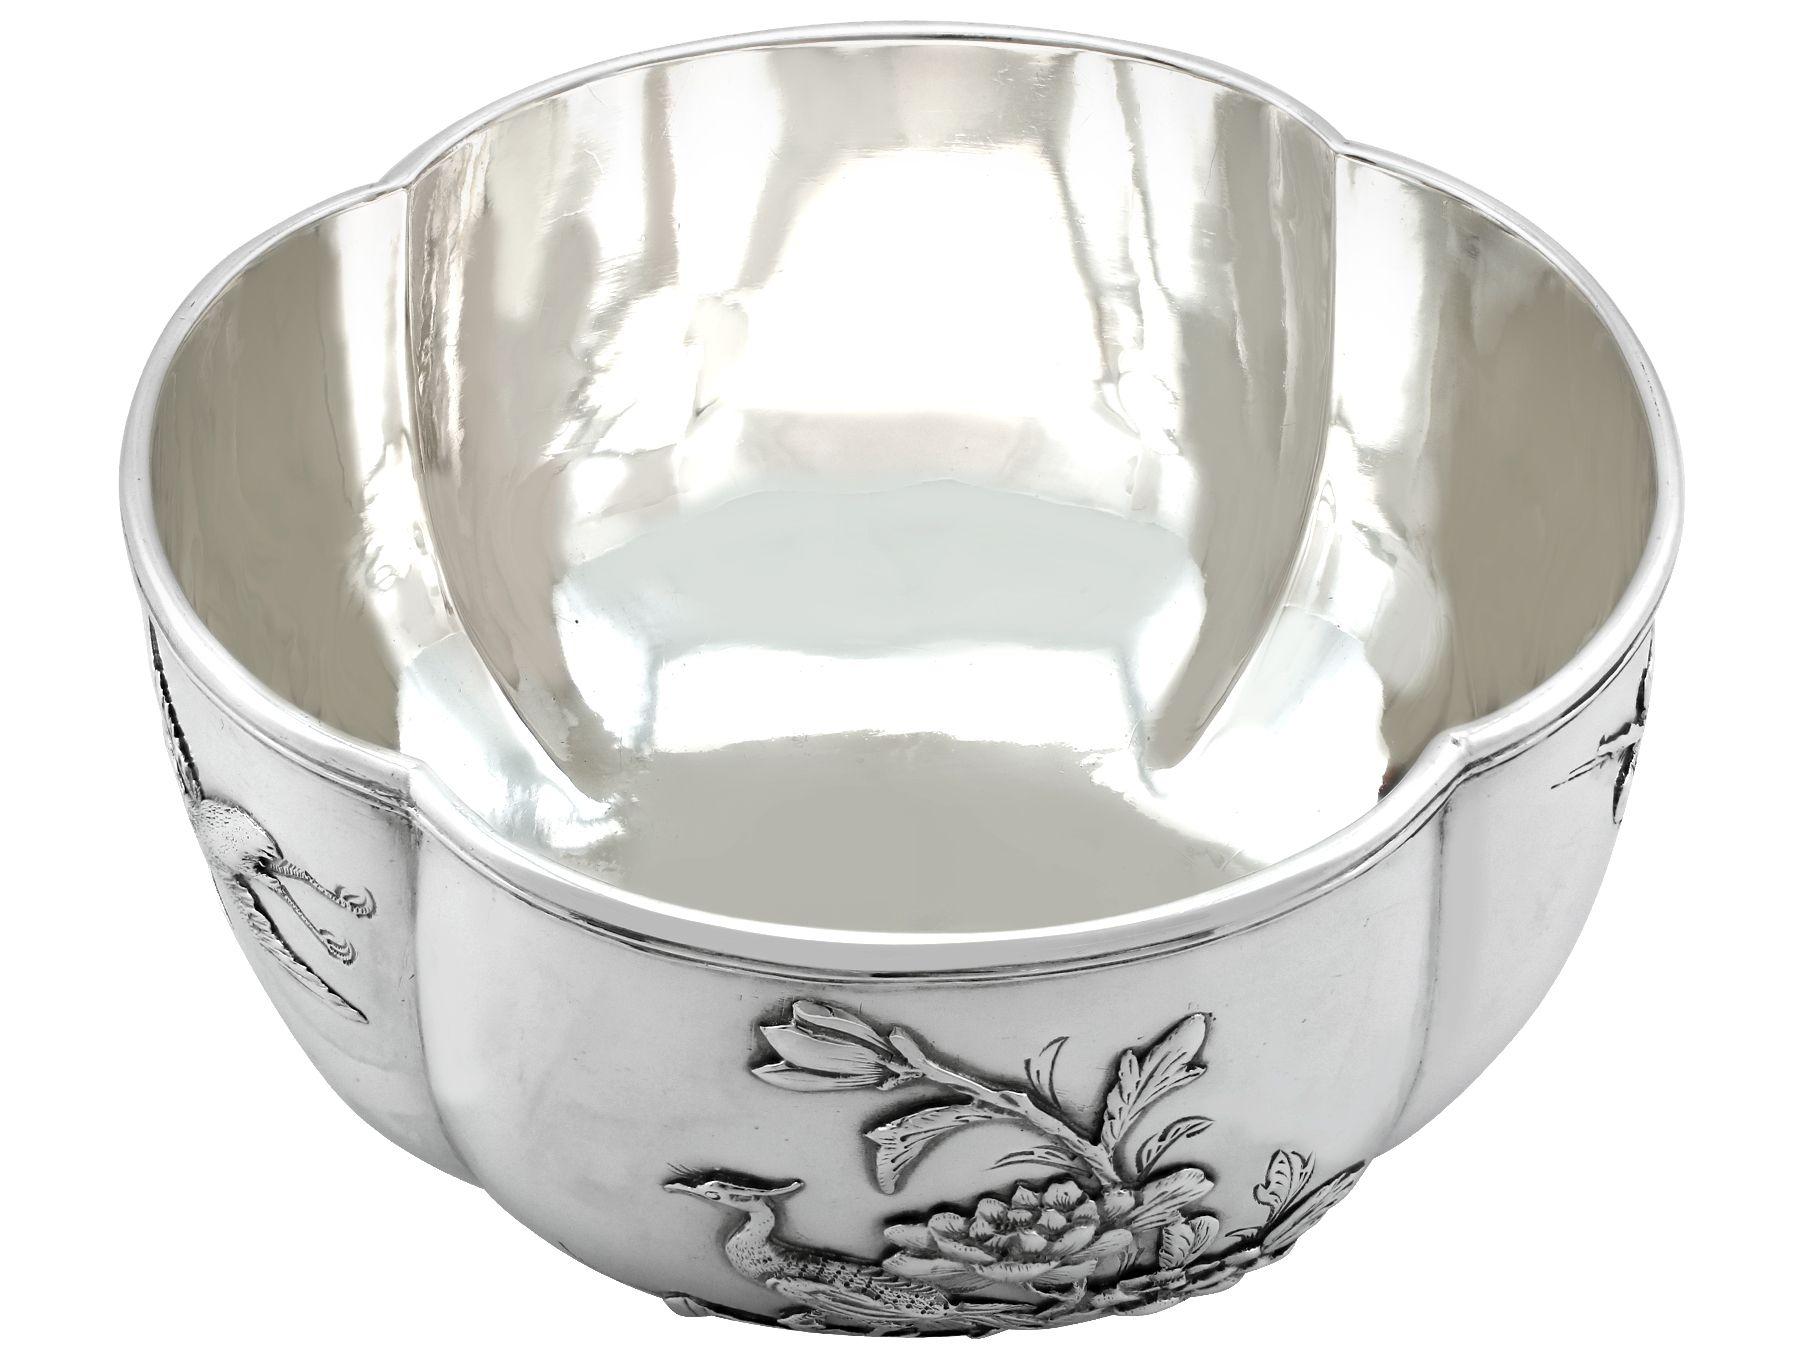 An exceptional, fine and impressive antique Chinese export silver bowl; an addition to our Asian silverware collection.

This exceptional Chinese Export Silver bowl has a circular rounded form onto a plain collet foot.

The incurved panelled